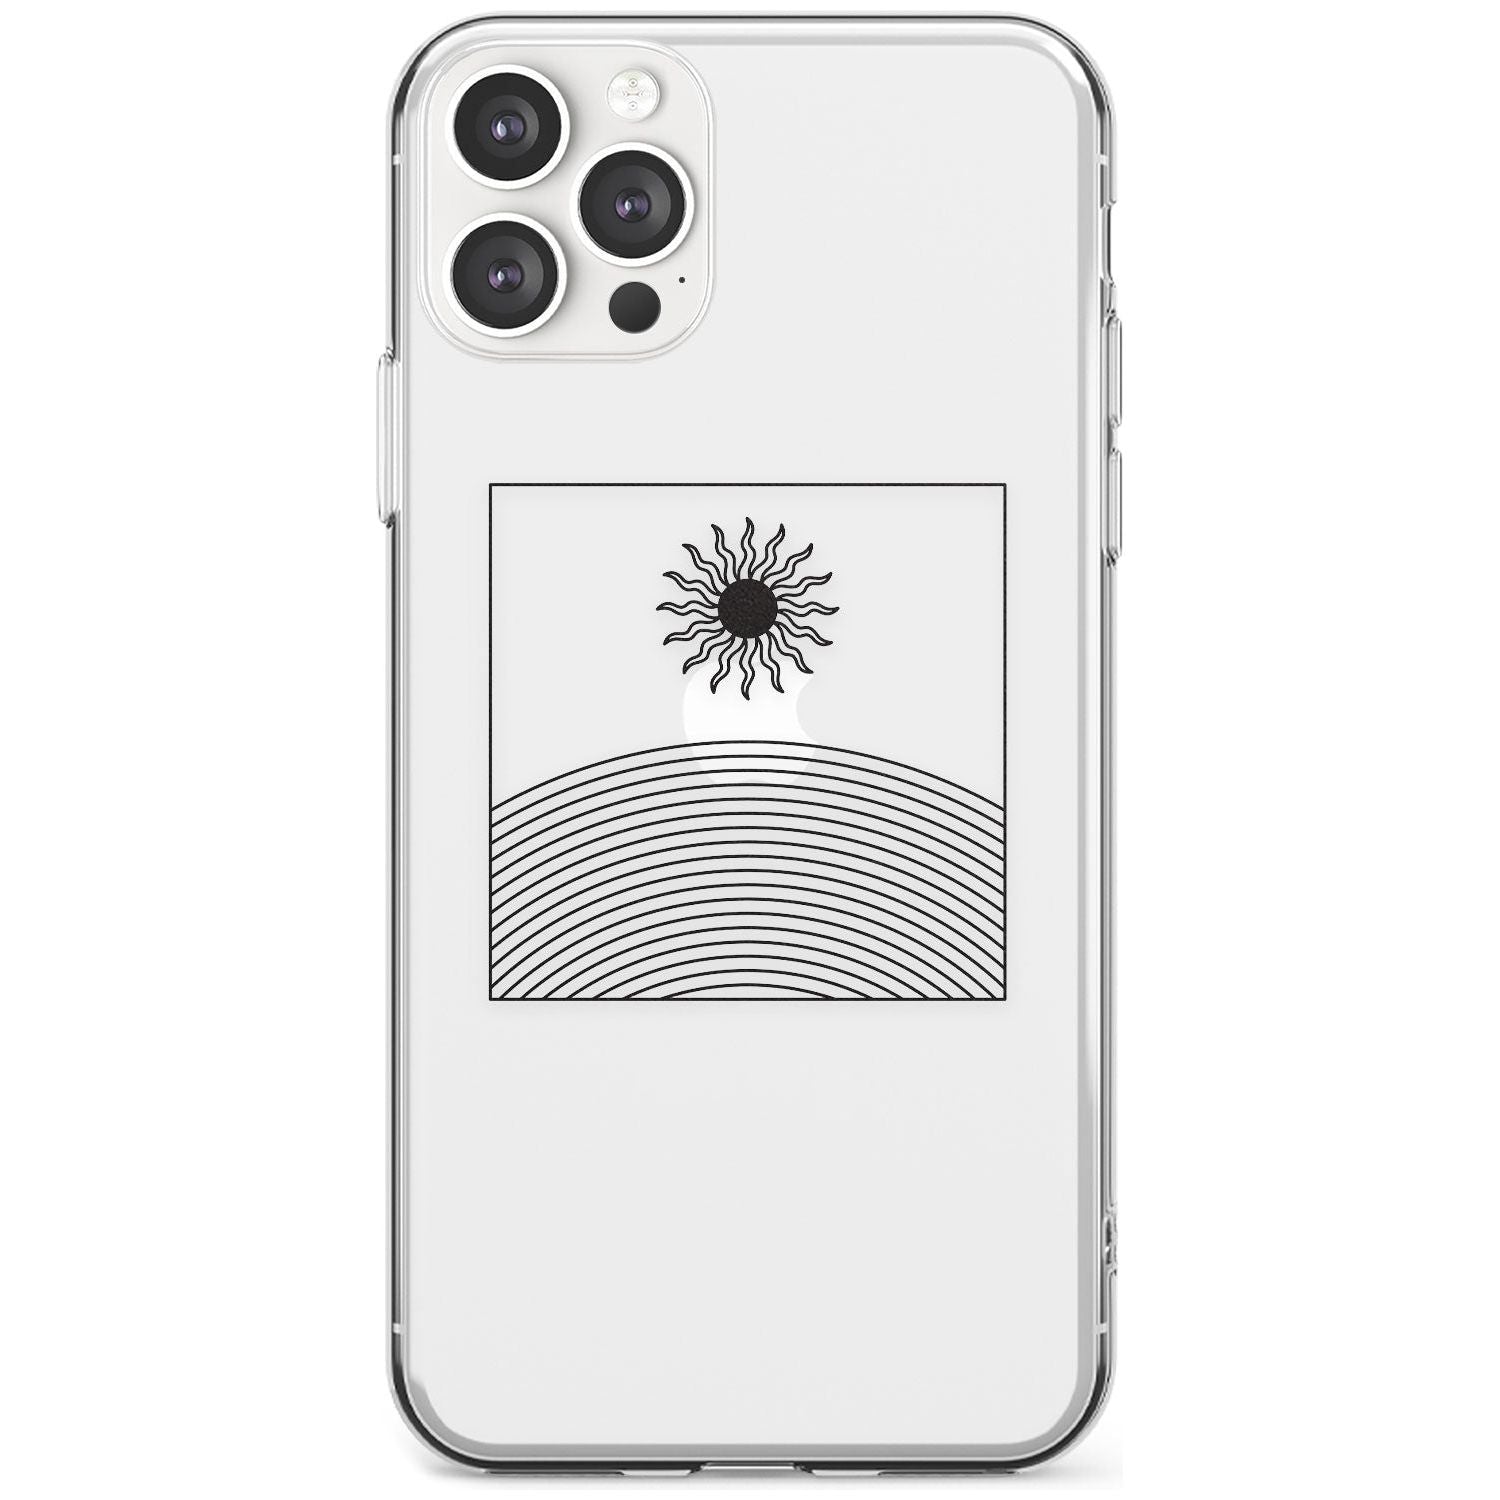 Framed Linework: Rising Sun Black Impact Phone Case for iPhone 11 Pro Max